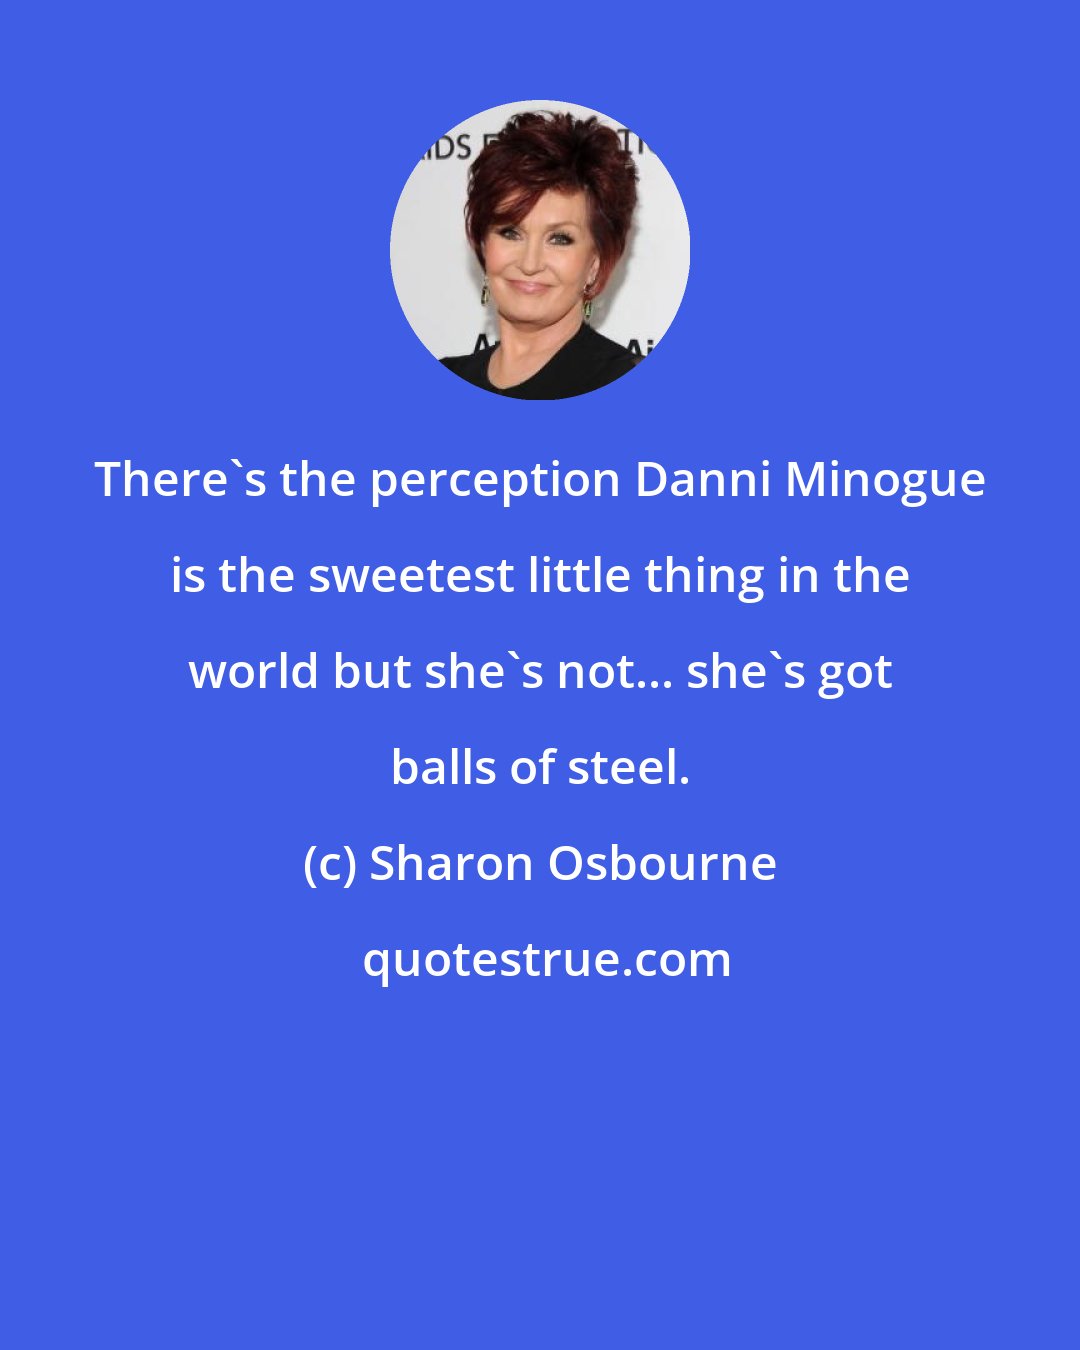 Sharon Osbourne: There's the perception Danni Minogue is the sweetest little thing in the world but she's not... she's got balls of steel.